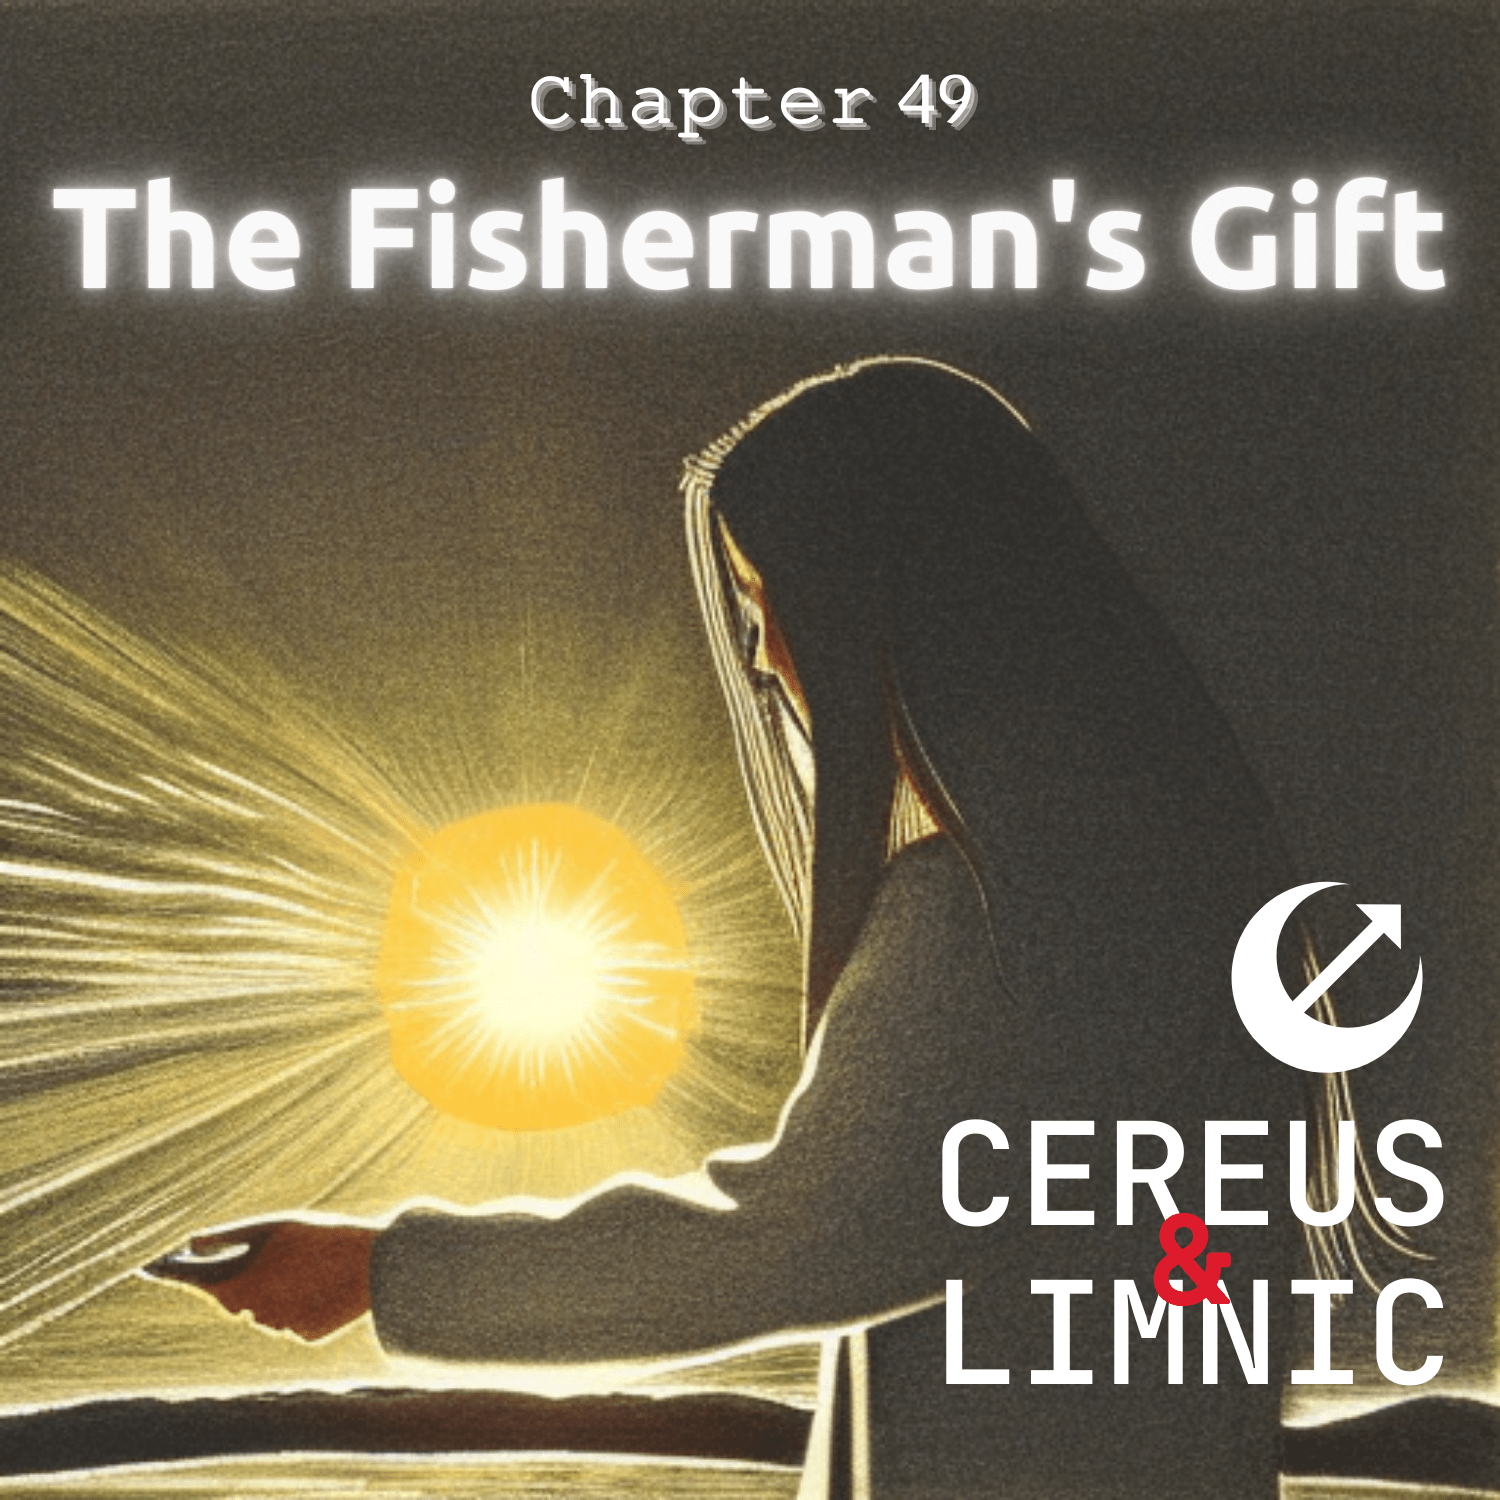 Chapter 49: The Fisherman's Gift